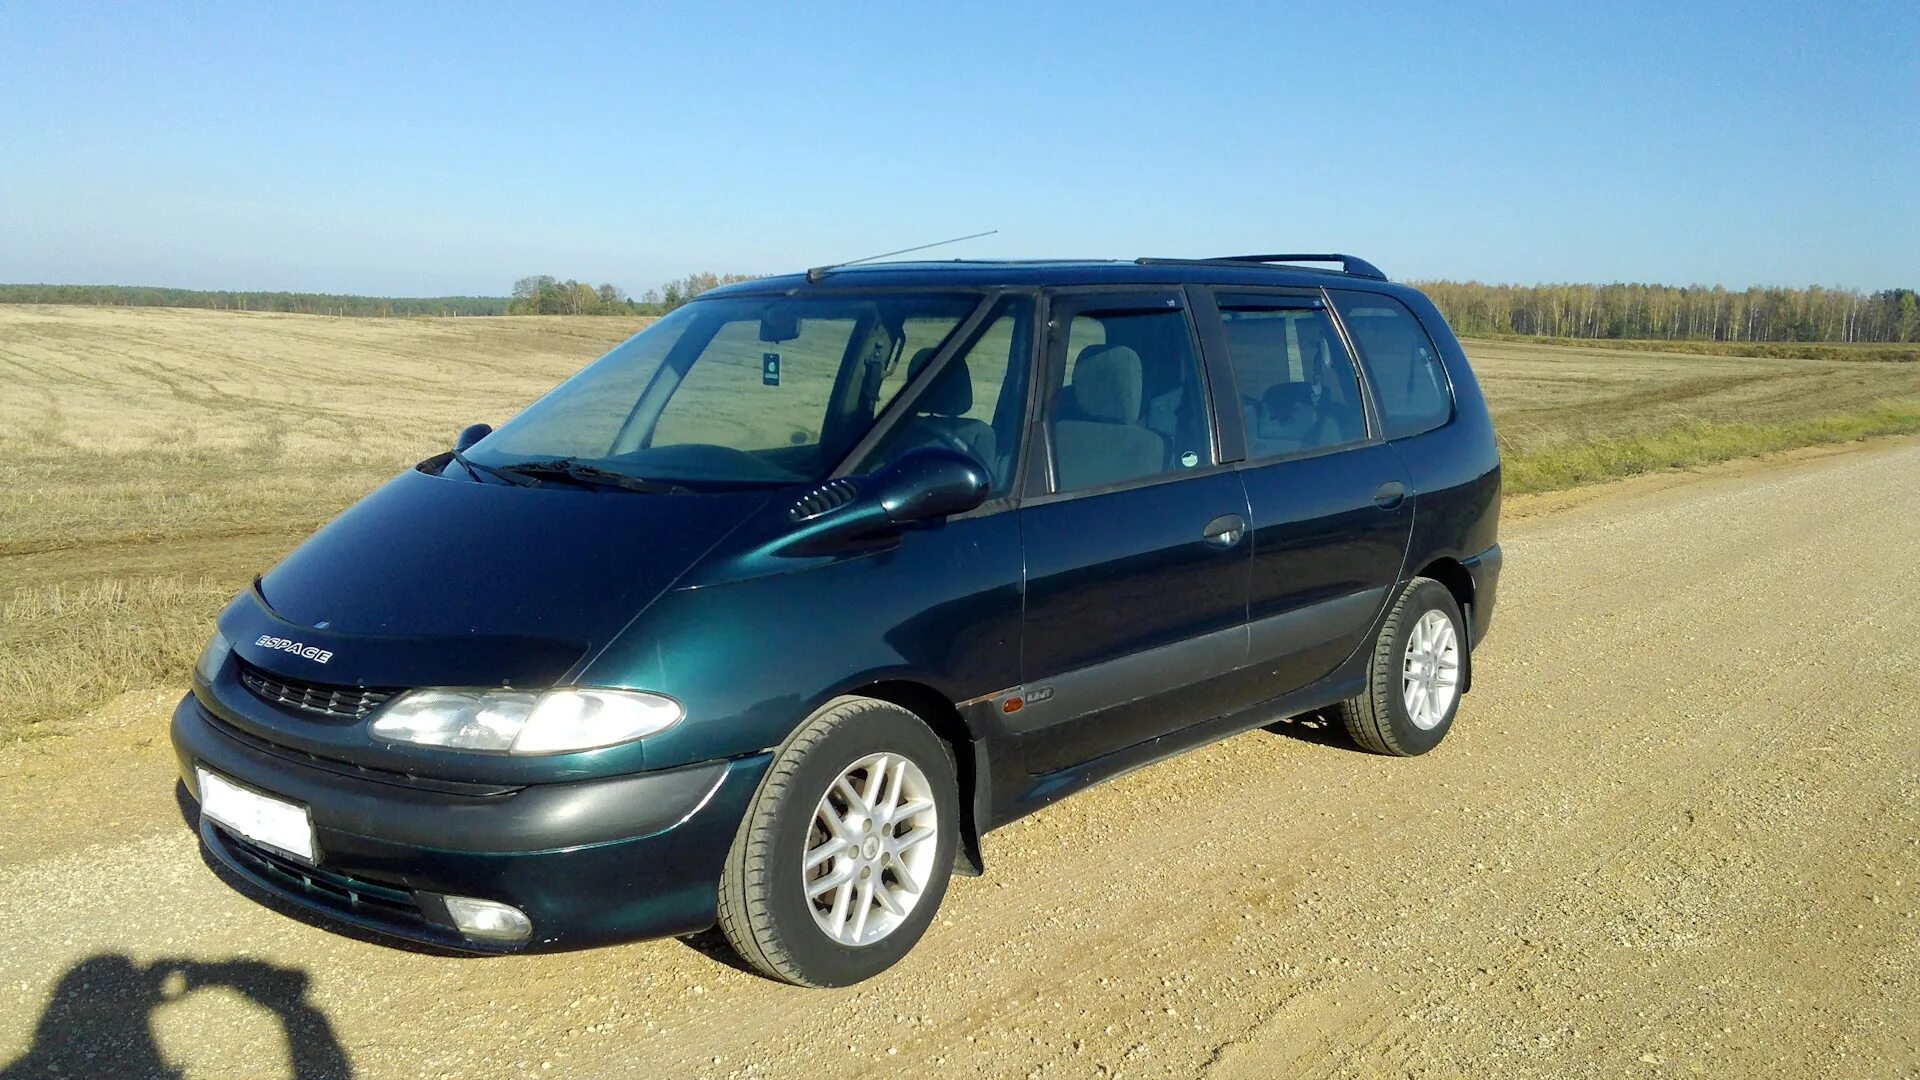 Renault espace 2. Renault Grand Espace 3. Renault Espace 2 Tuning. Рено Espace 2.2 Limited.